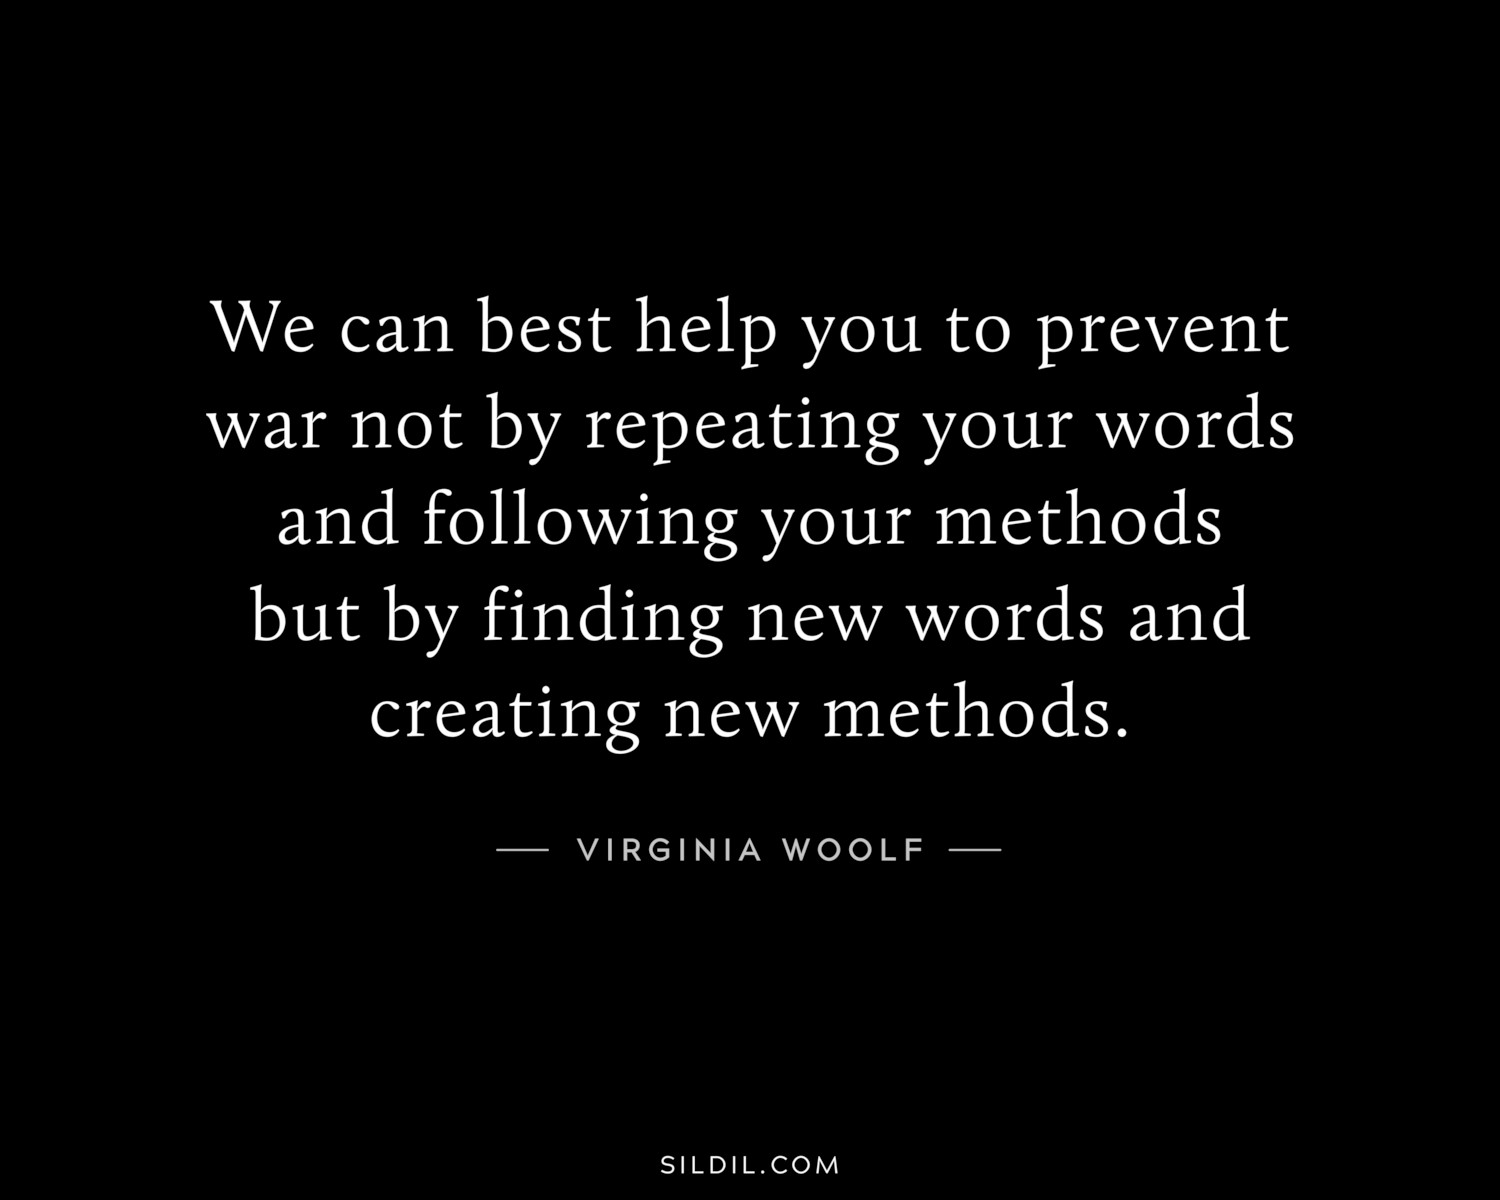 We can best help you to prevent war not by repeating your words and following your methods but by finding new words and creating new methods.